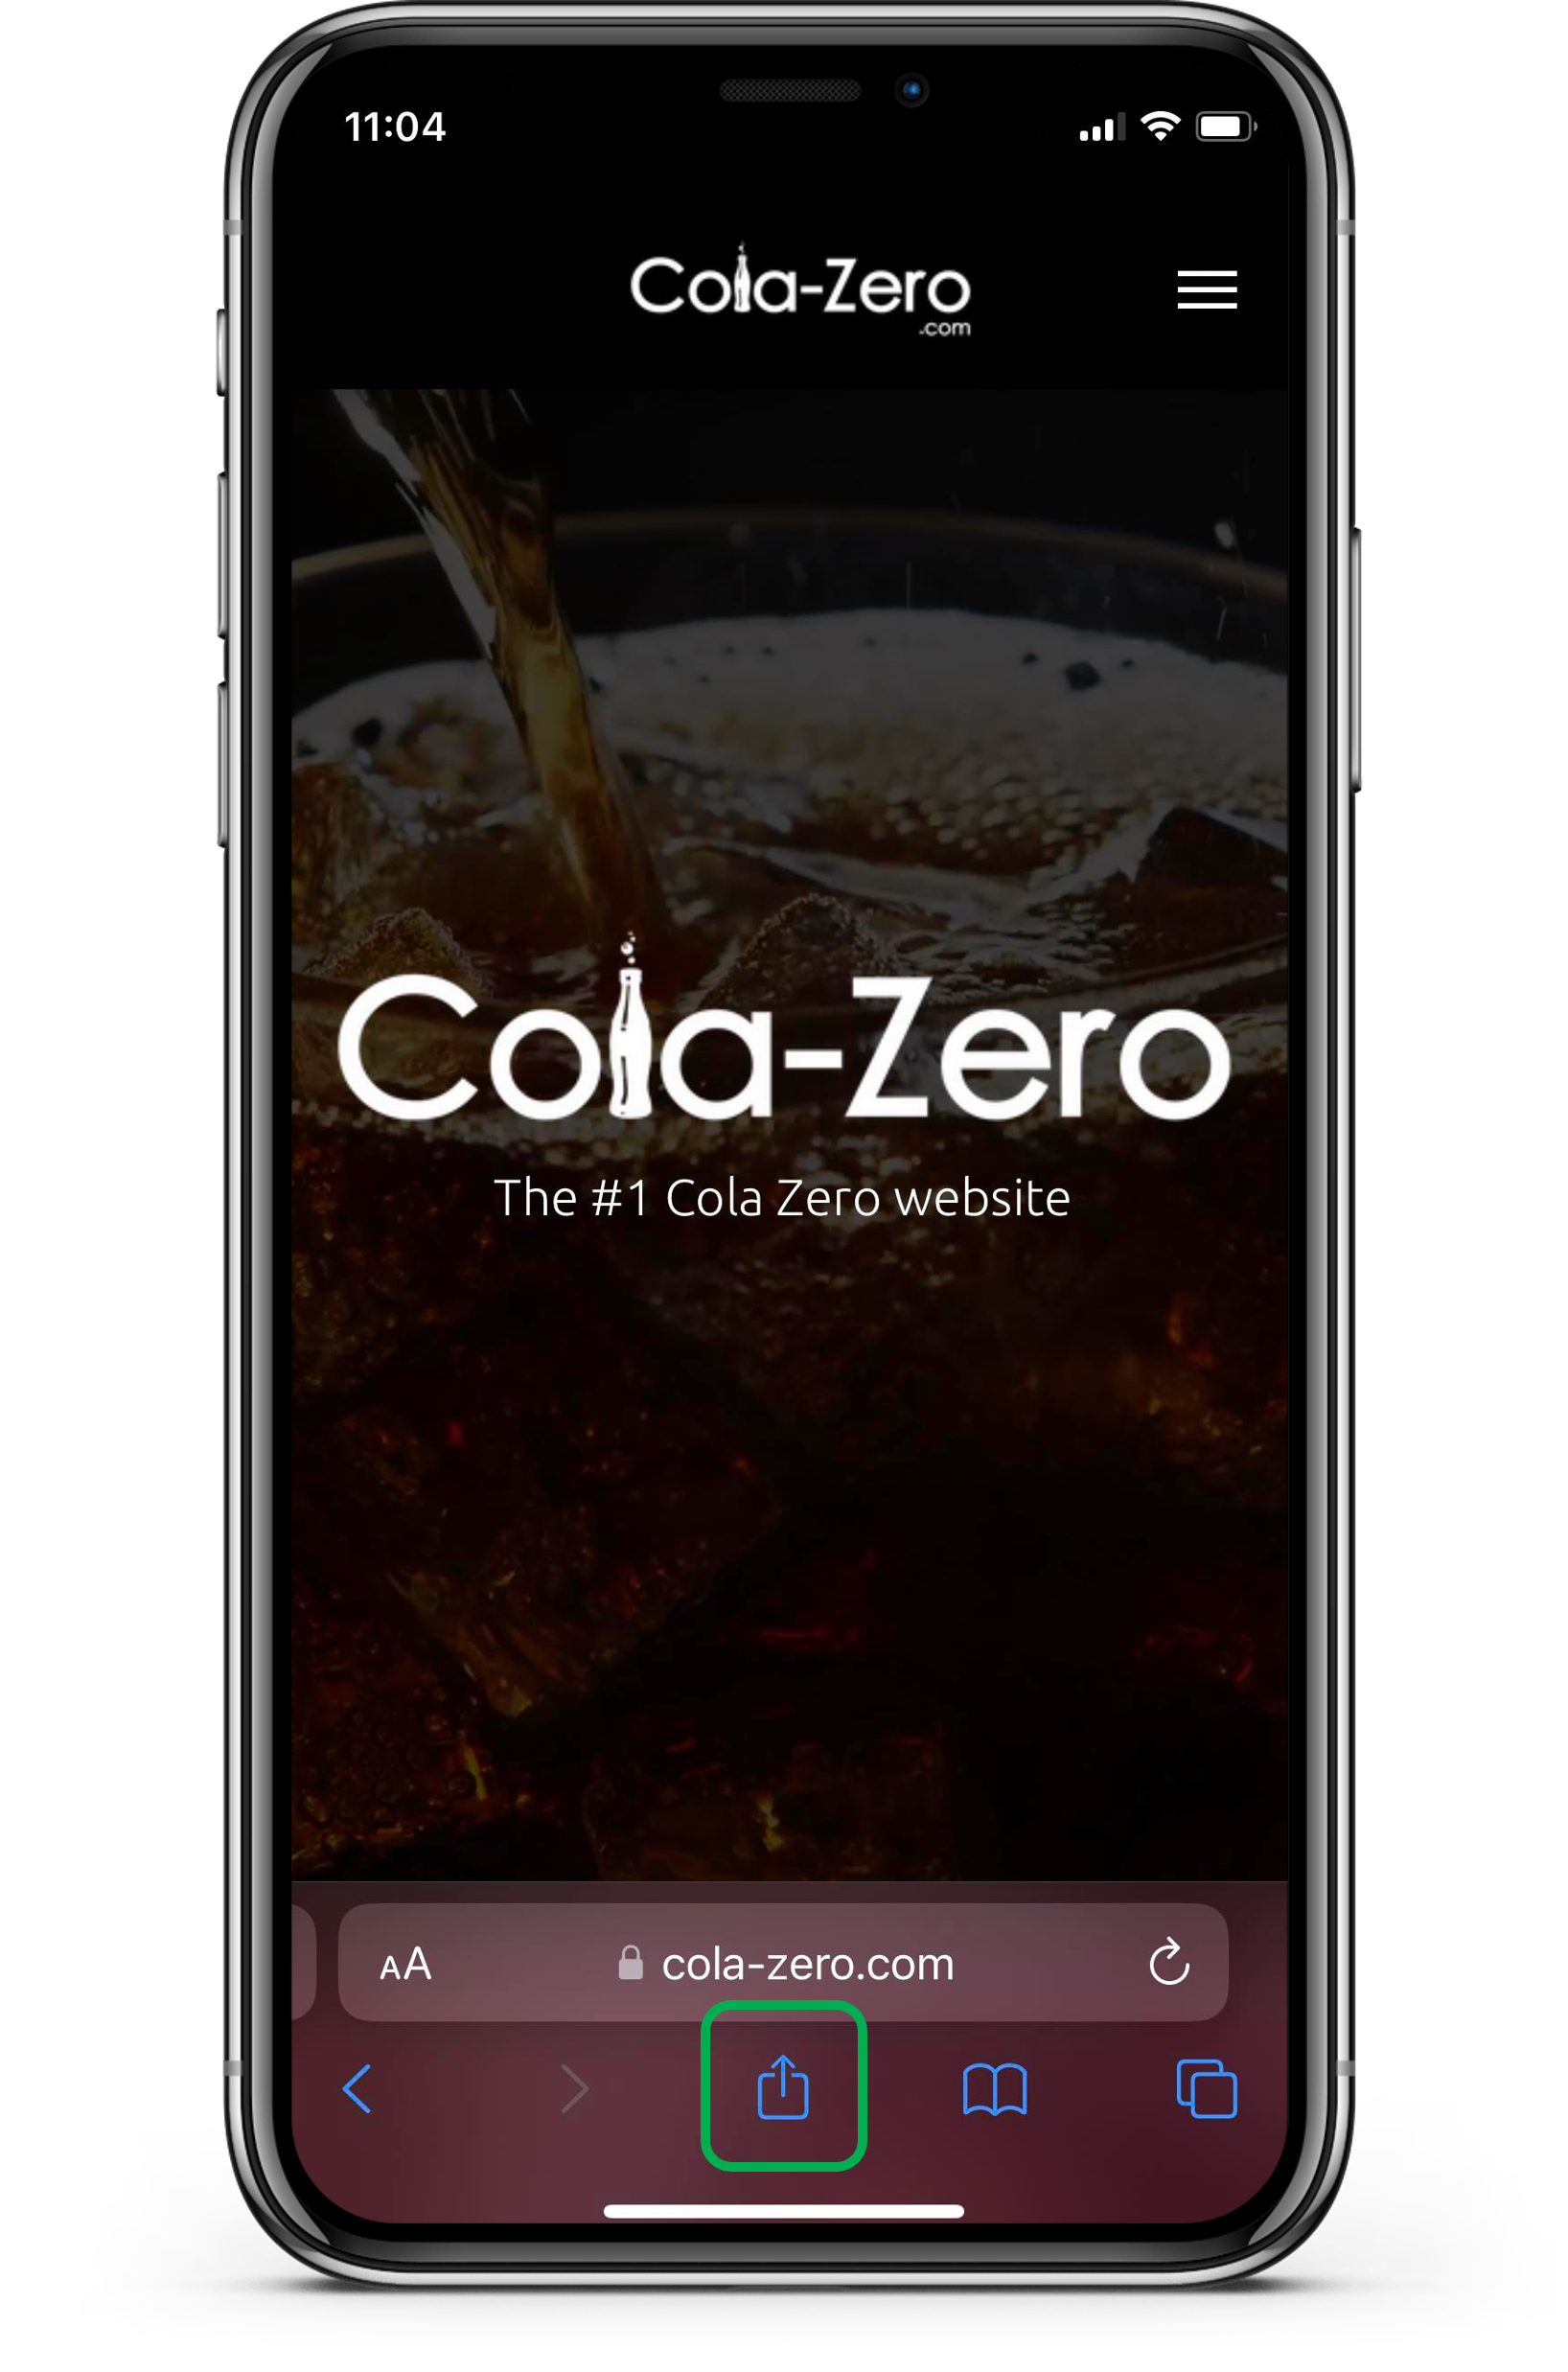 Add-to-Home-Screen-iOS_like-an-app_Description-for-you-with-iPhone-or-iPad_Step-1_Cola-Zero.com